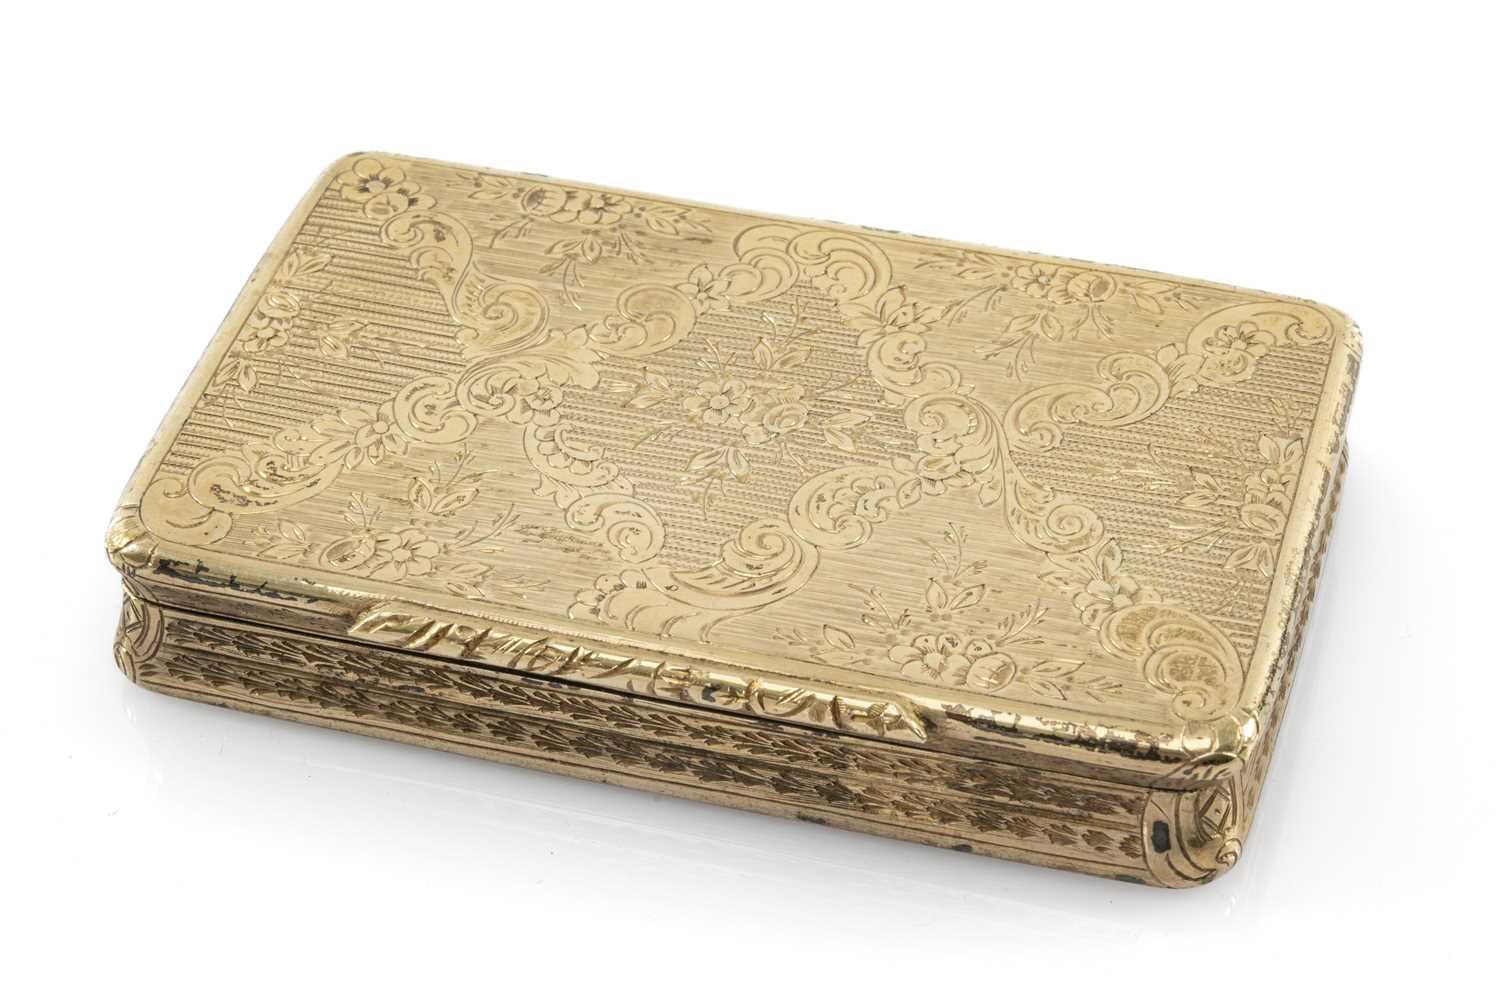 FINE 18TH/19TH C. SPANISH SILVER GILT SNUFF BOX, engraved with flowers within rococo panels to the